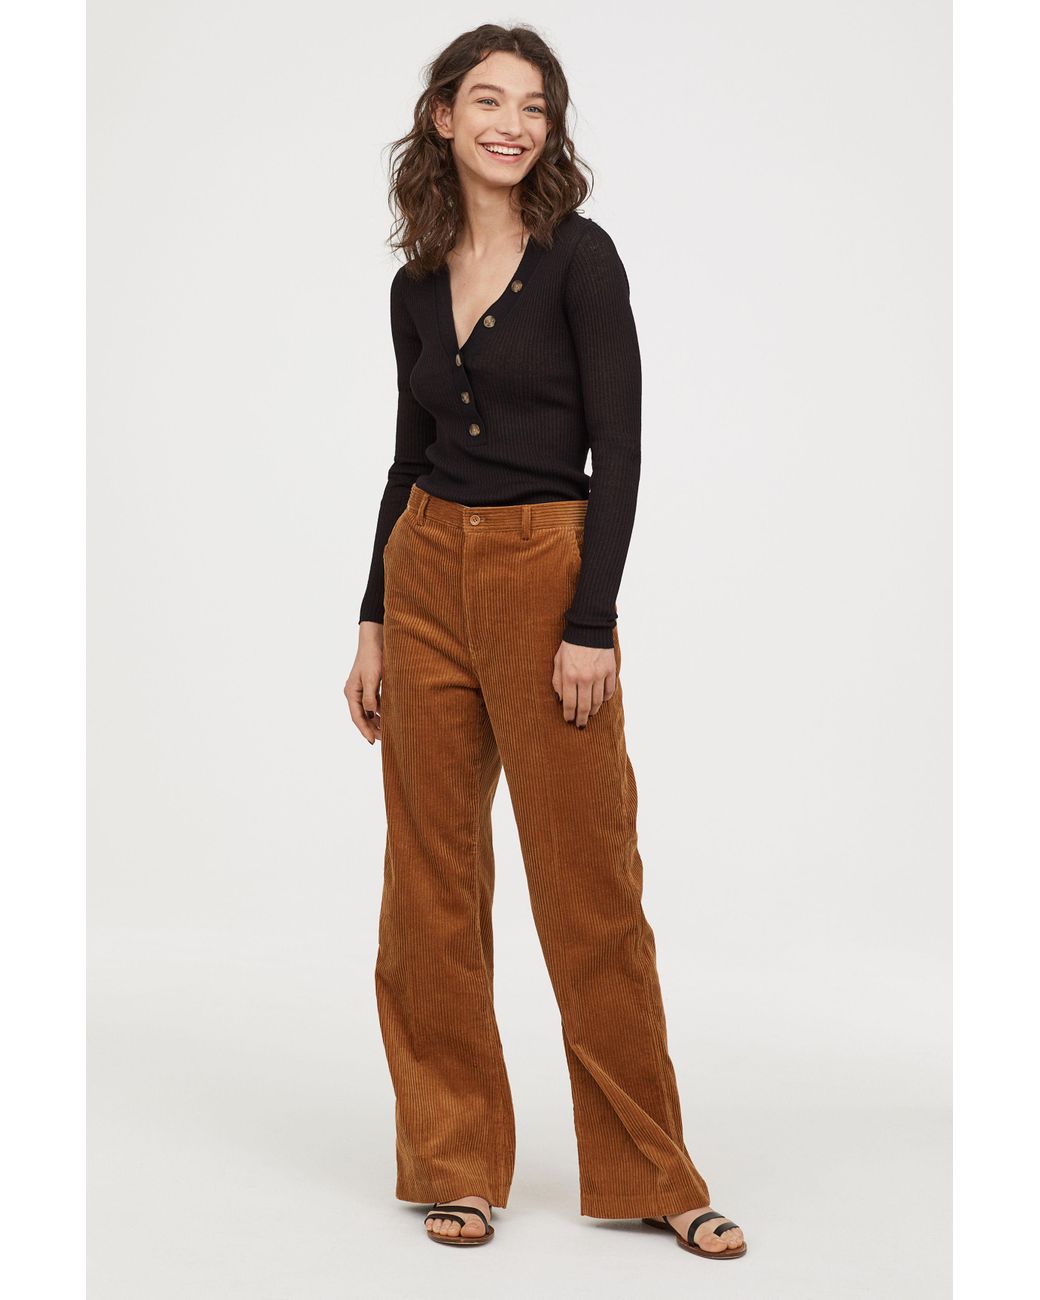 Discover more than 77 light brown corduroy trousers - in.cdgdbentre